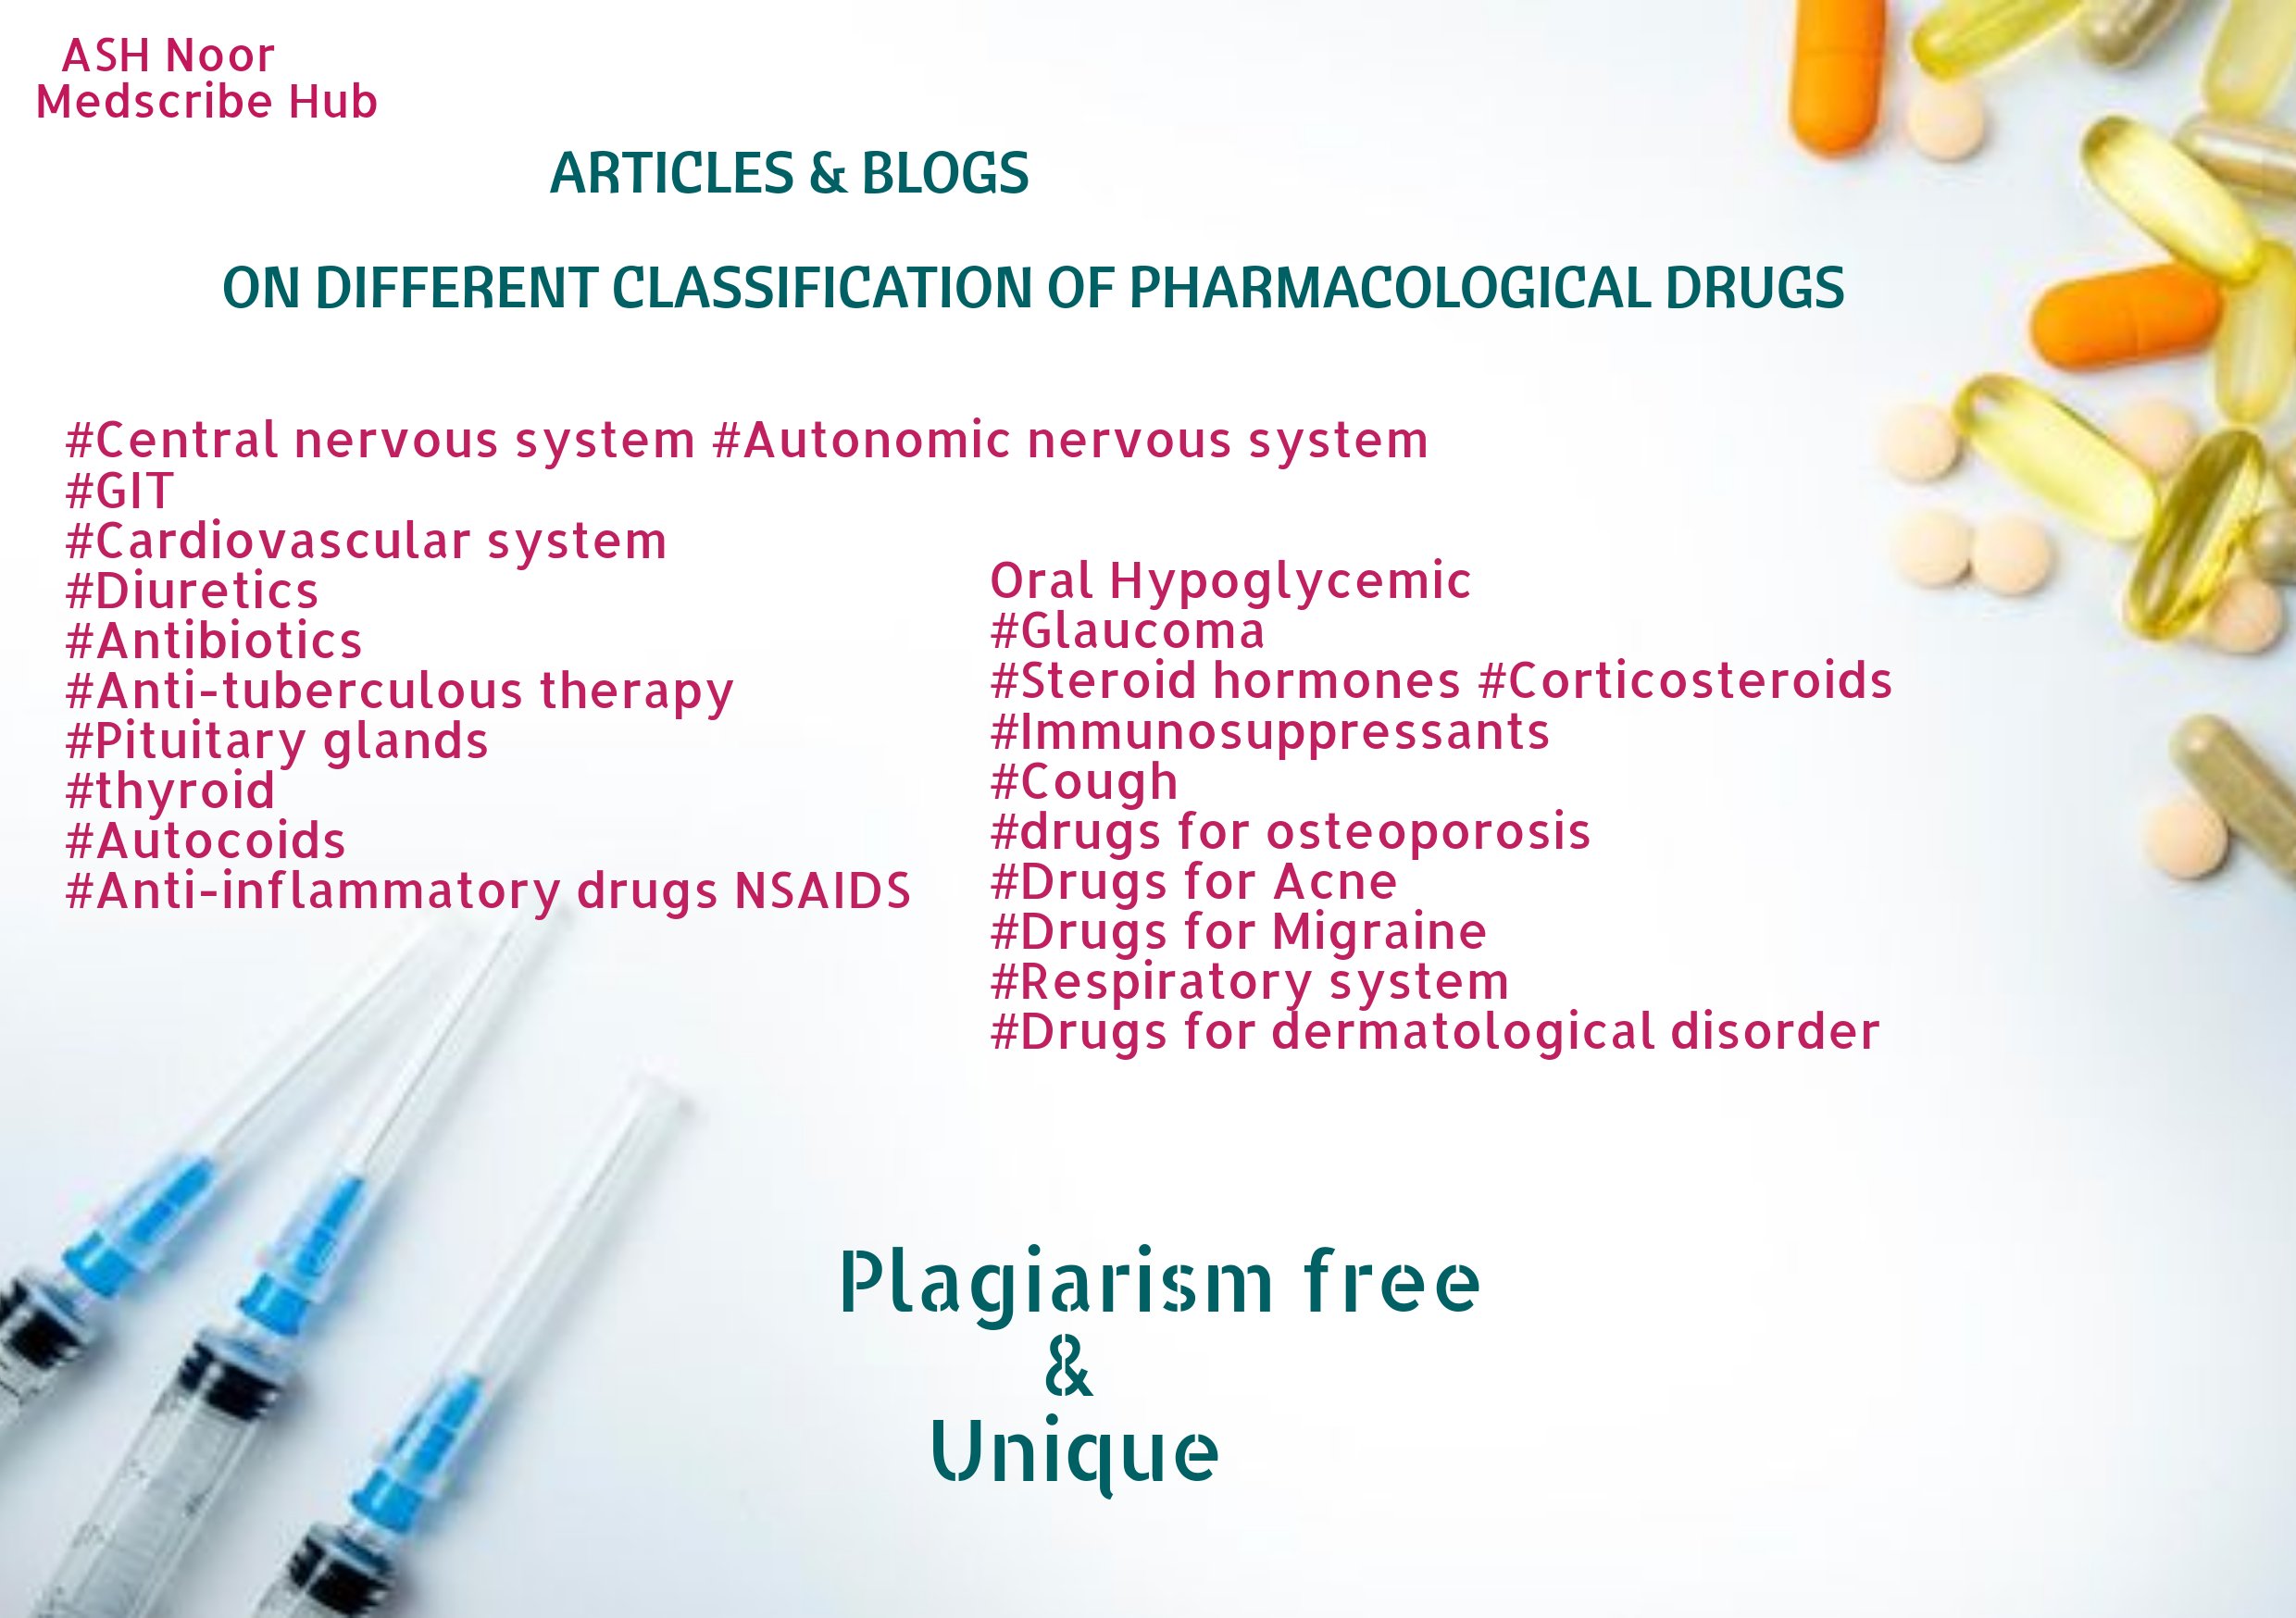 194065I will write an expert pharmacology drug article and blog